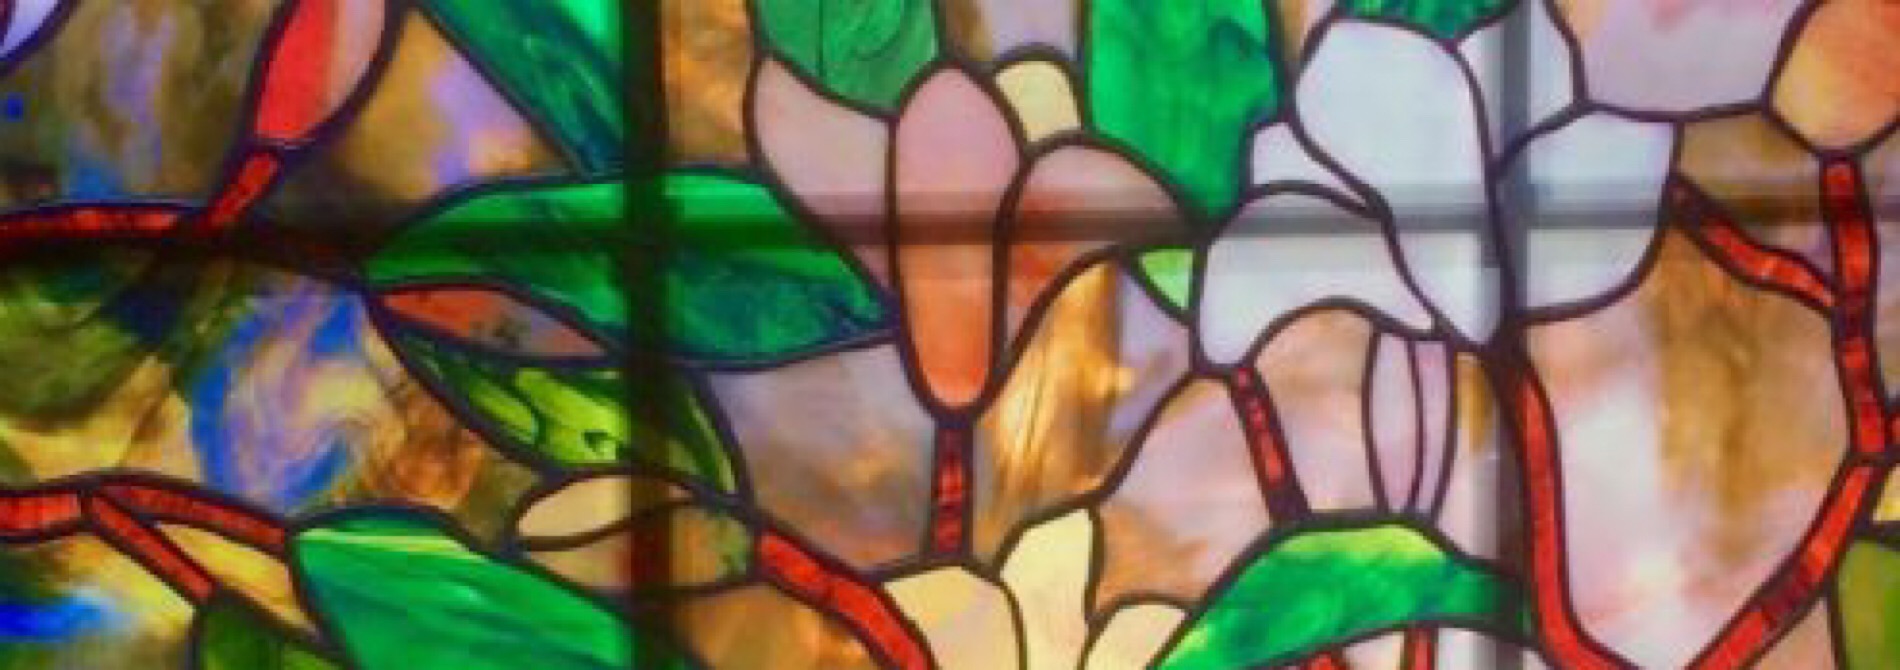 stained glass window green yellow pink red